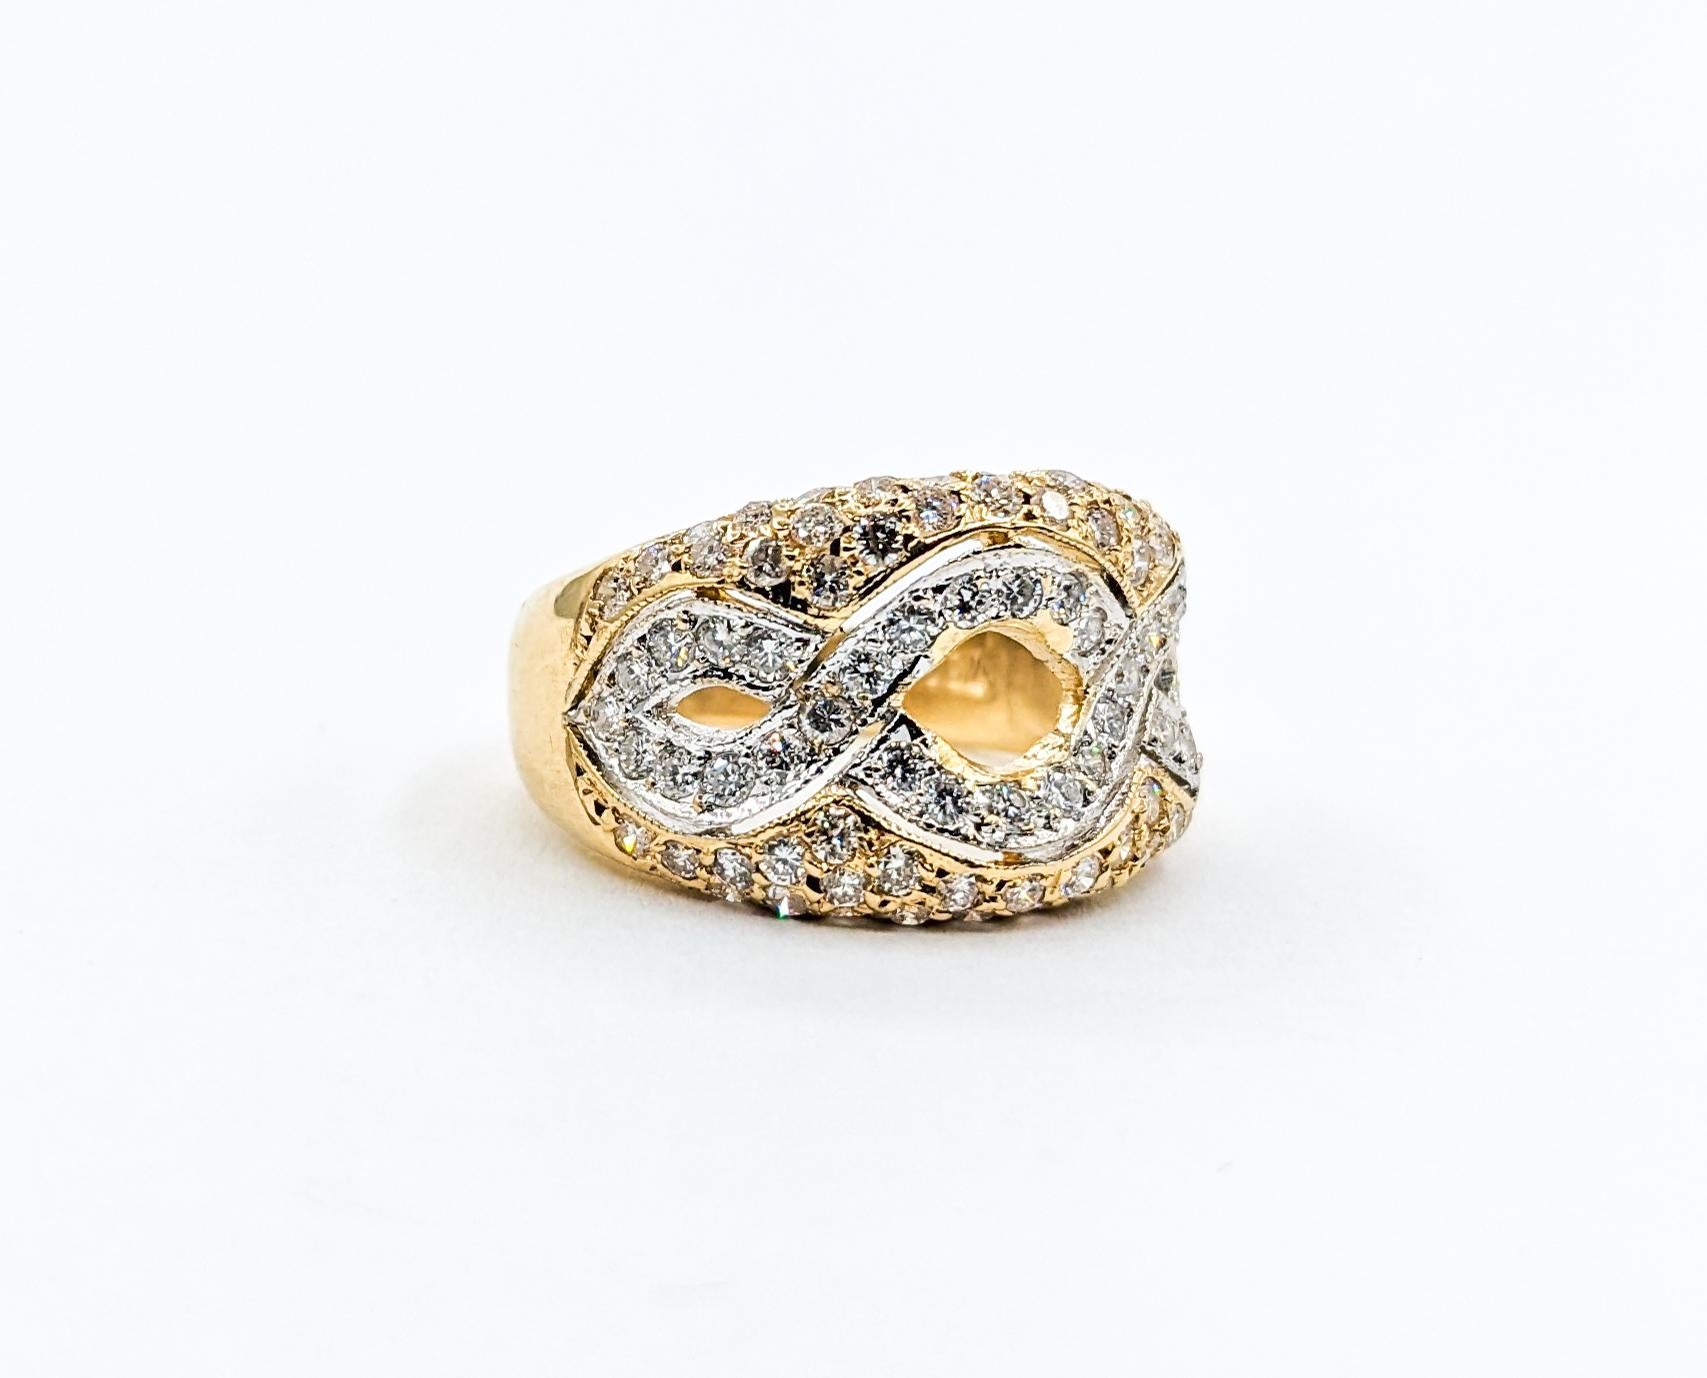 1ctw Diamond Ring In Two-Tone Gold For Sale 4